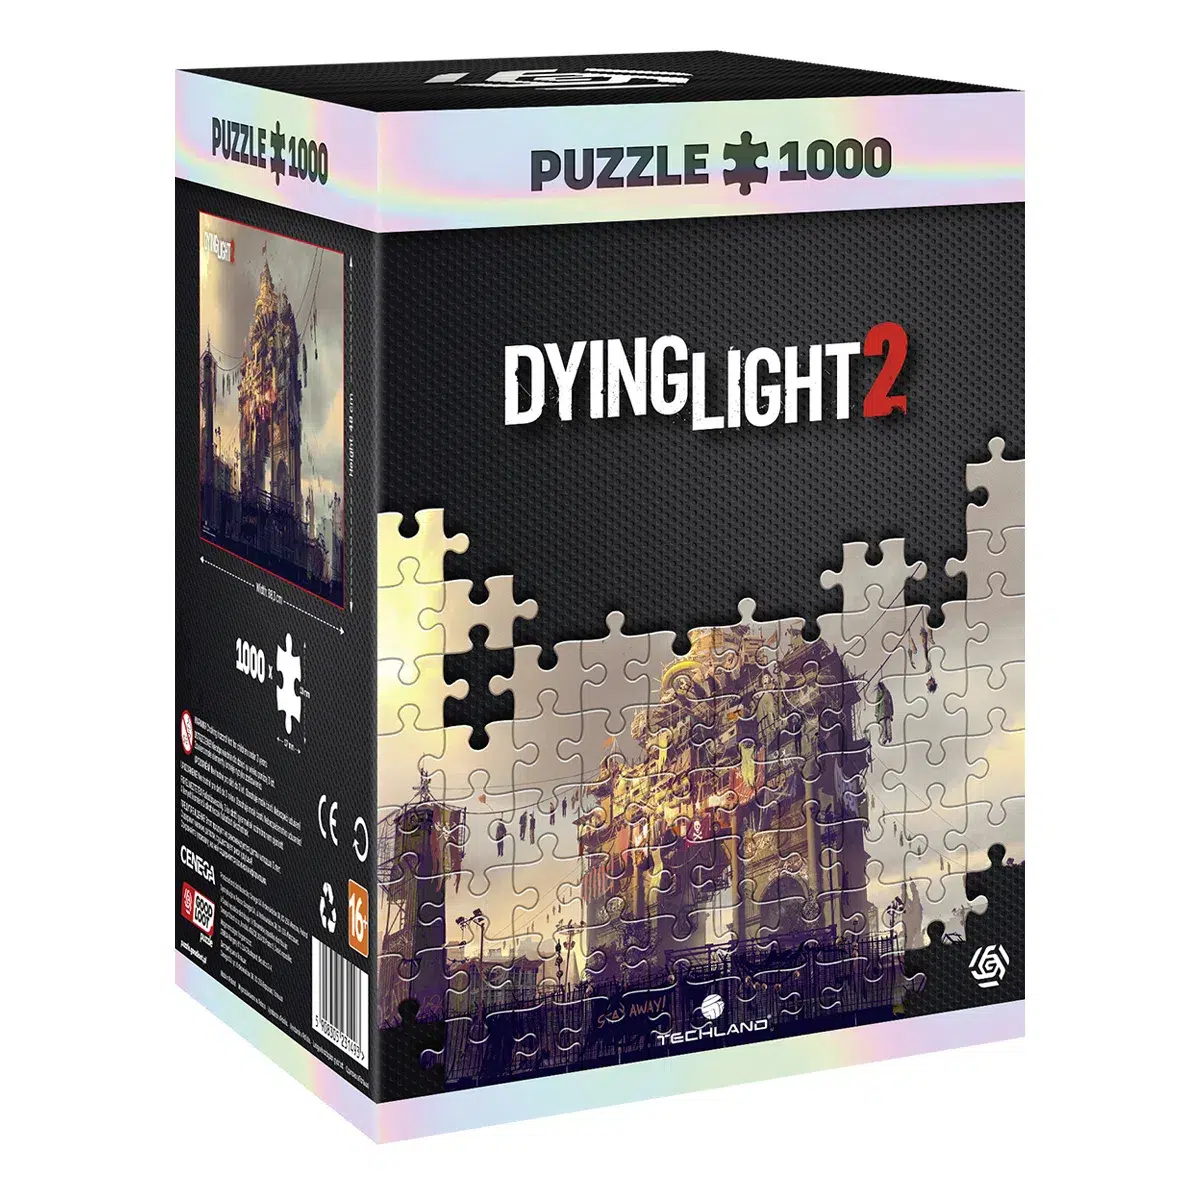 Dying Light 2 Puzzle "Arch" (1000 pcs)